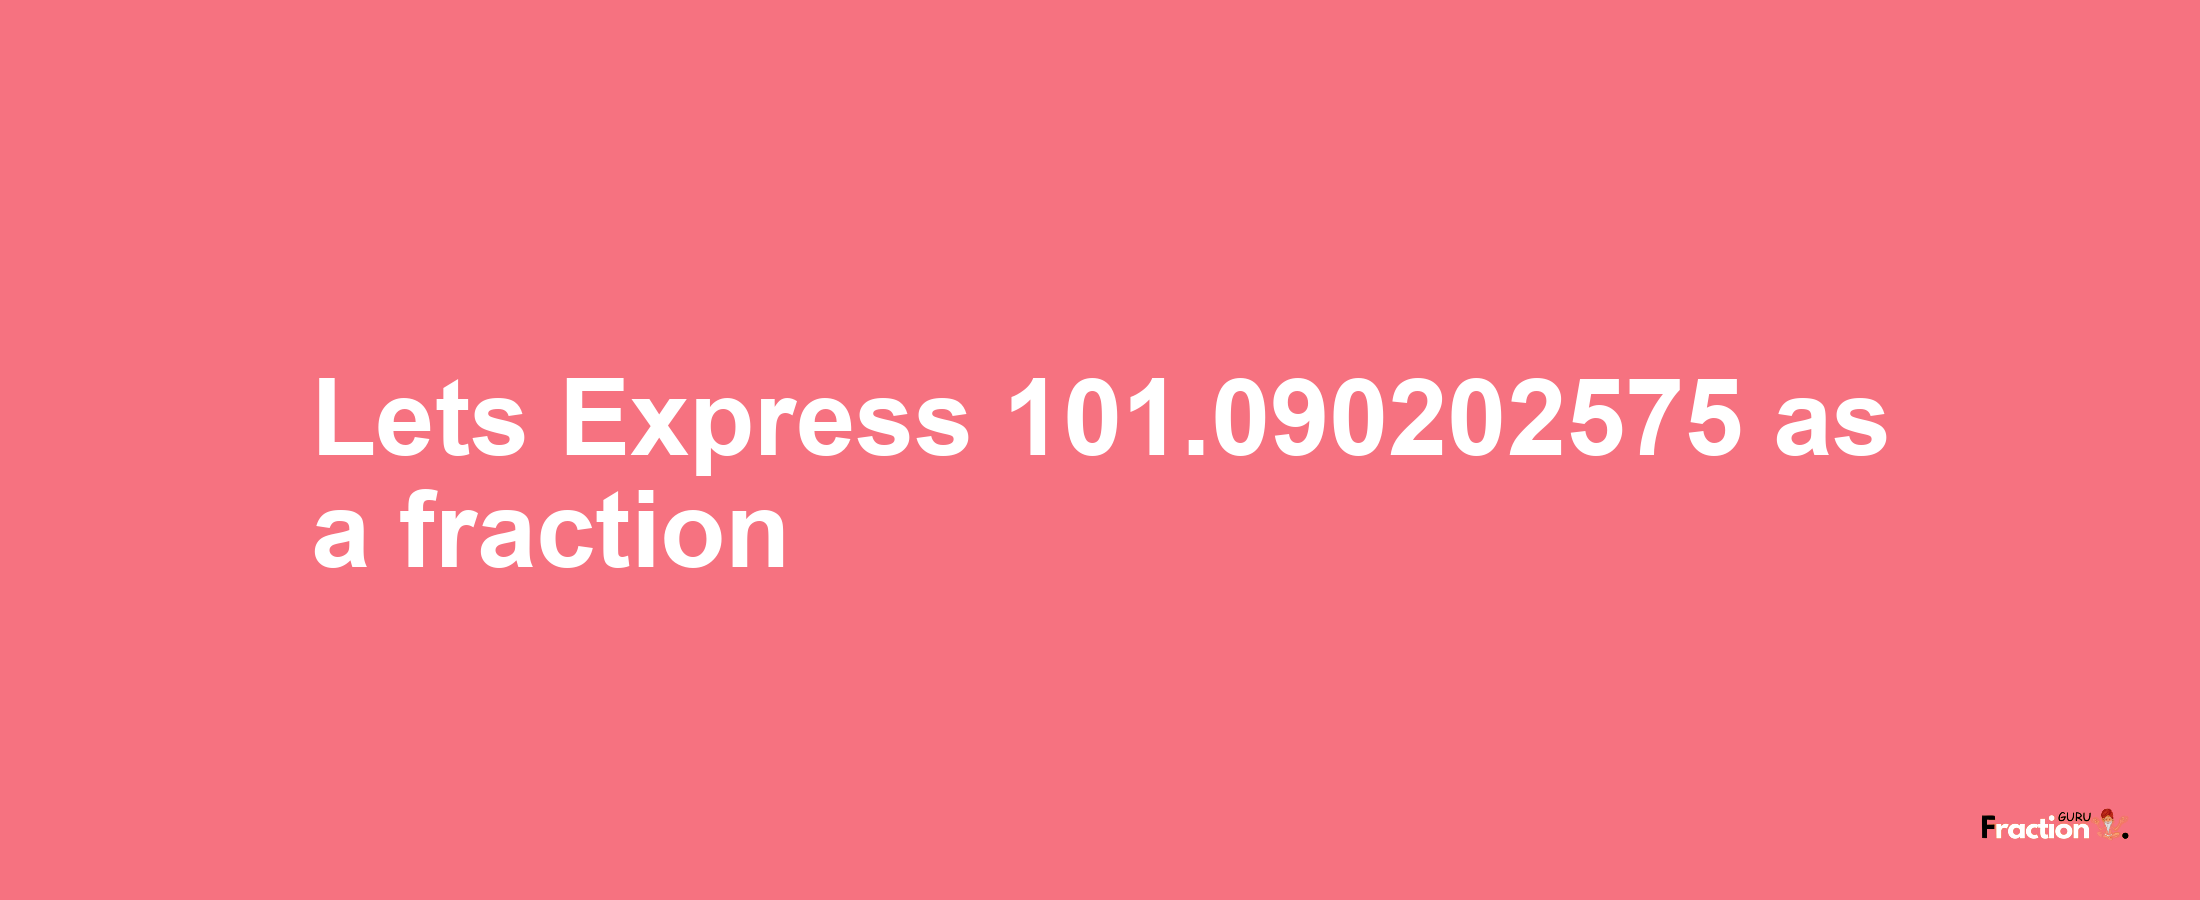 Lets Express 101.090202575 as afraction